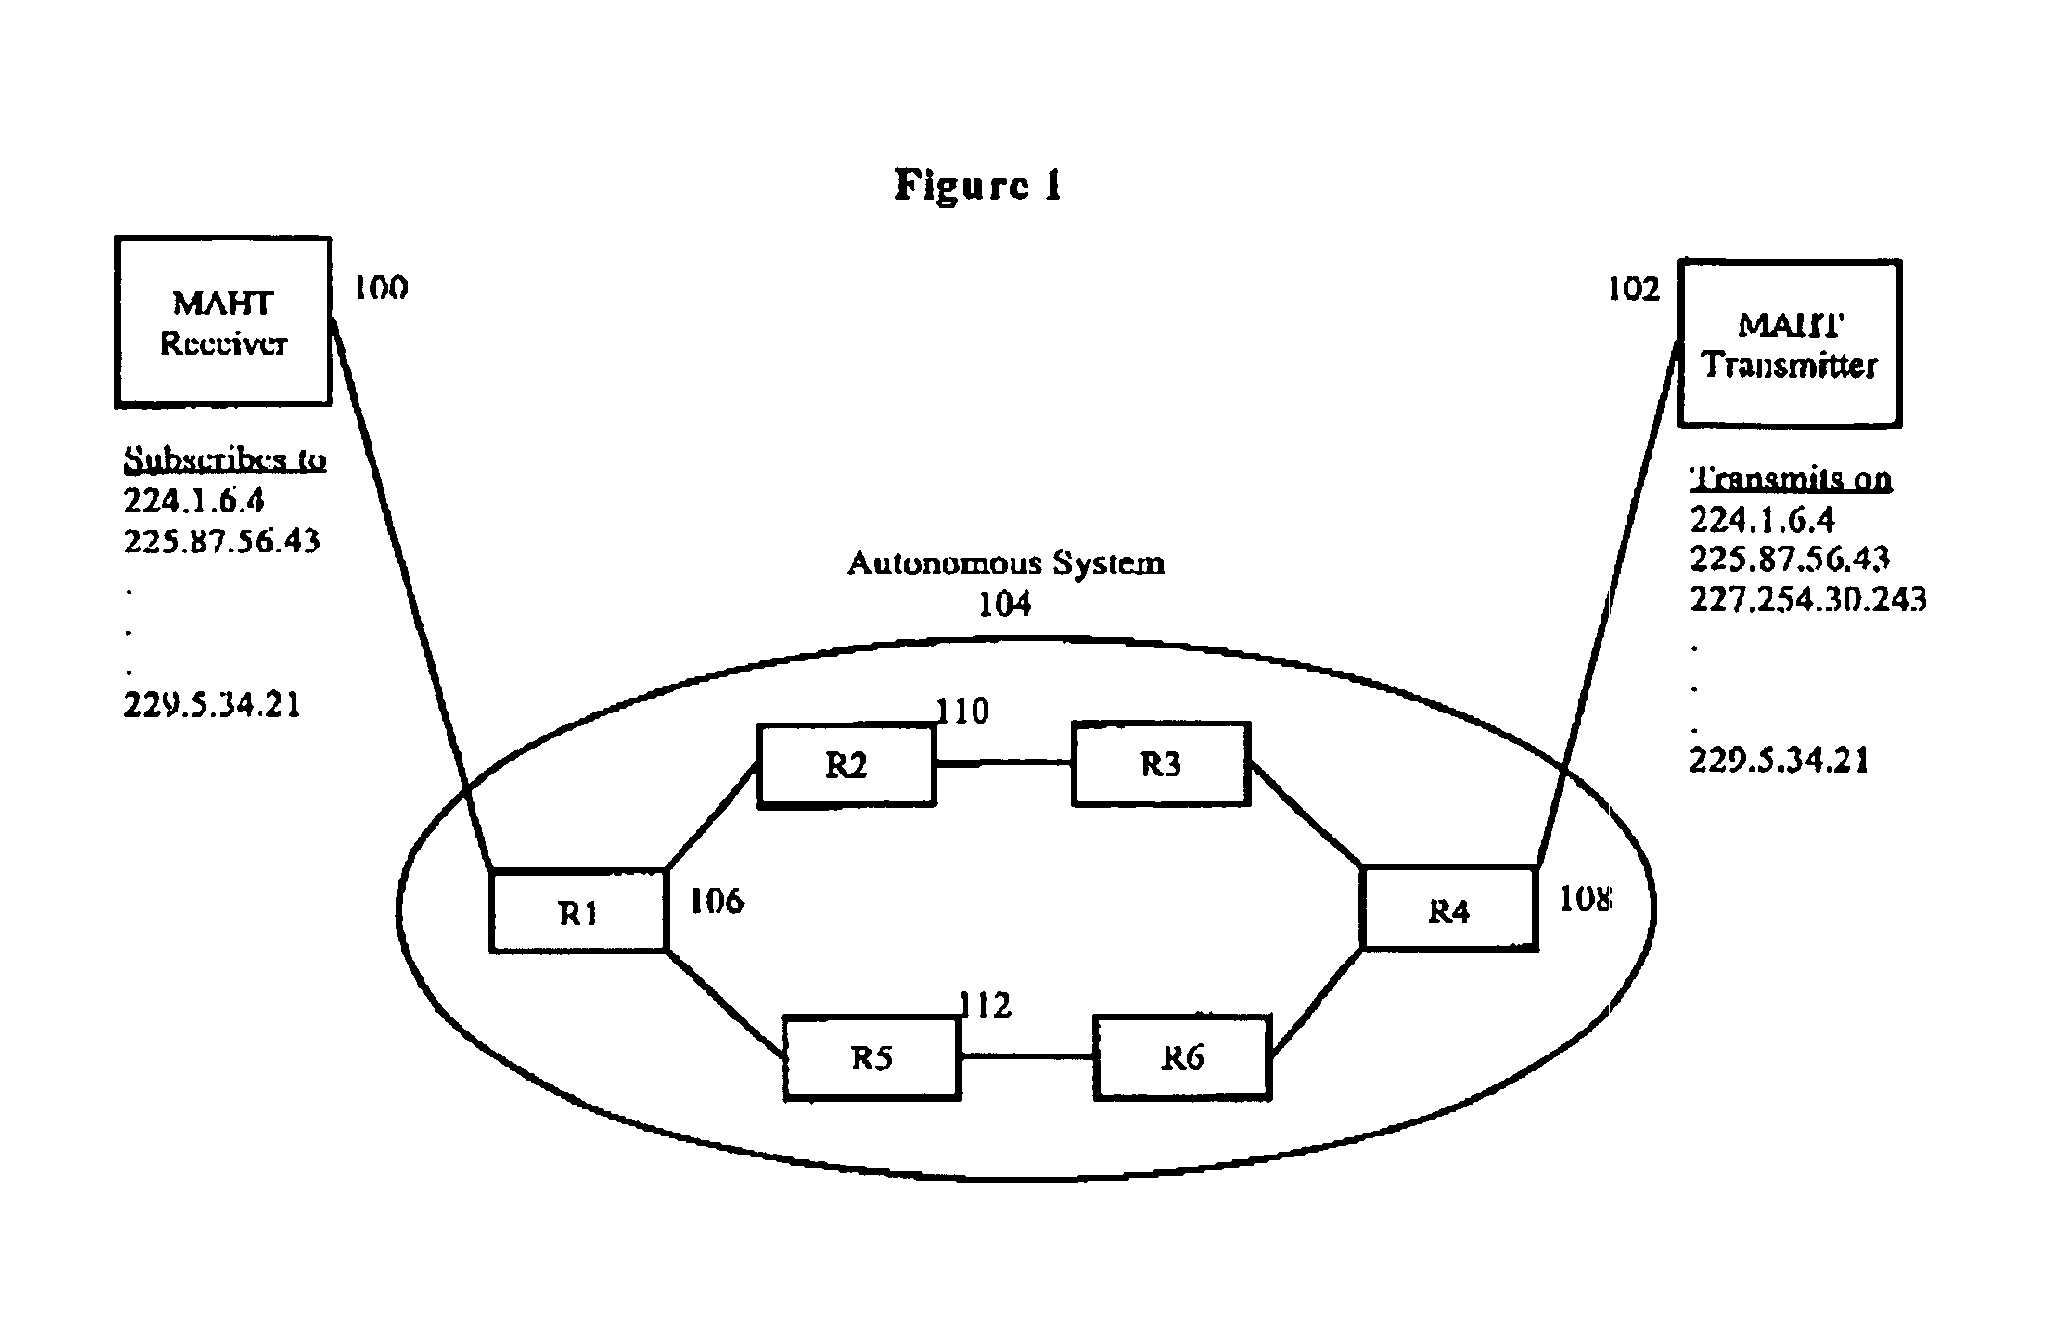 Method and system for protection of internet sites against denial of service attacks through use of an IP multicast address hopping technique